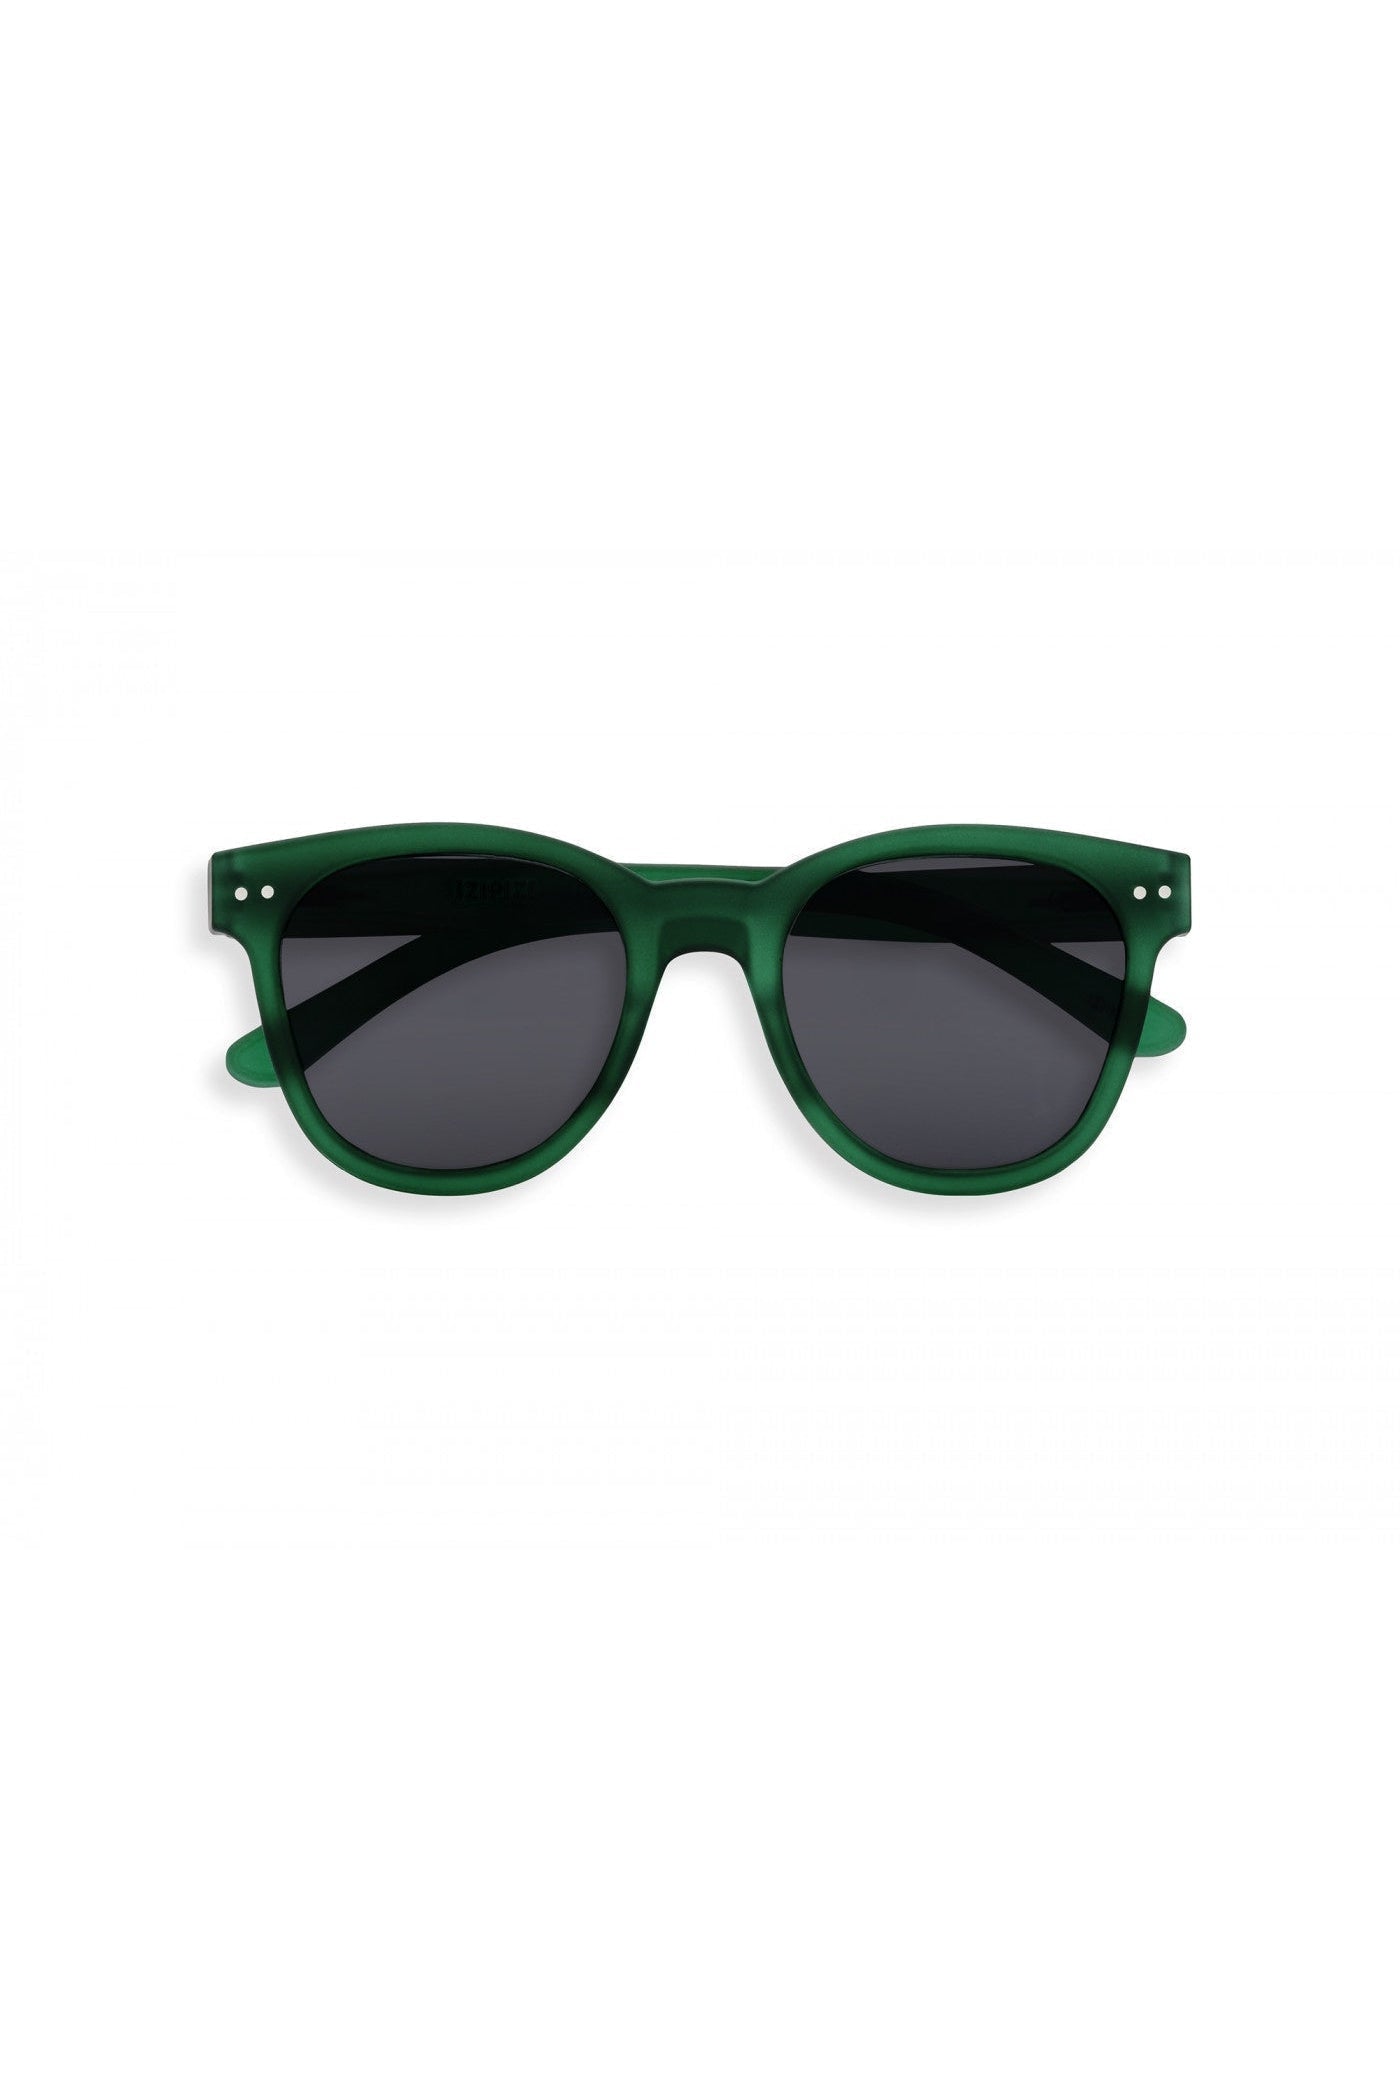 Izipizi #N Sunglasses in Crystal Green-Accessories-Ohh! By Gum - Shop Sustainable